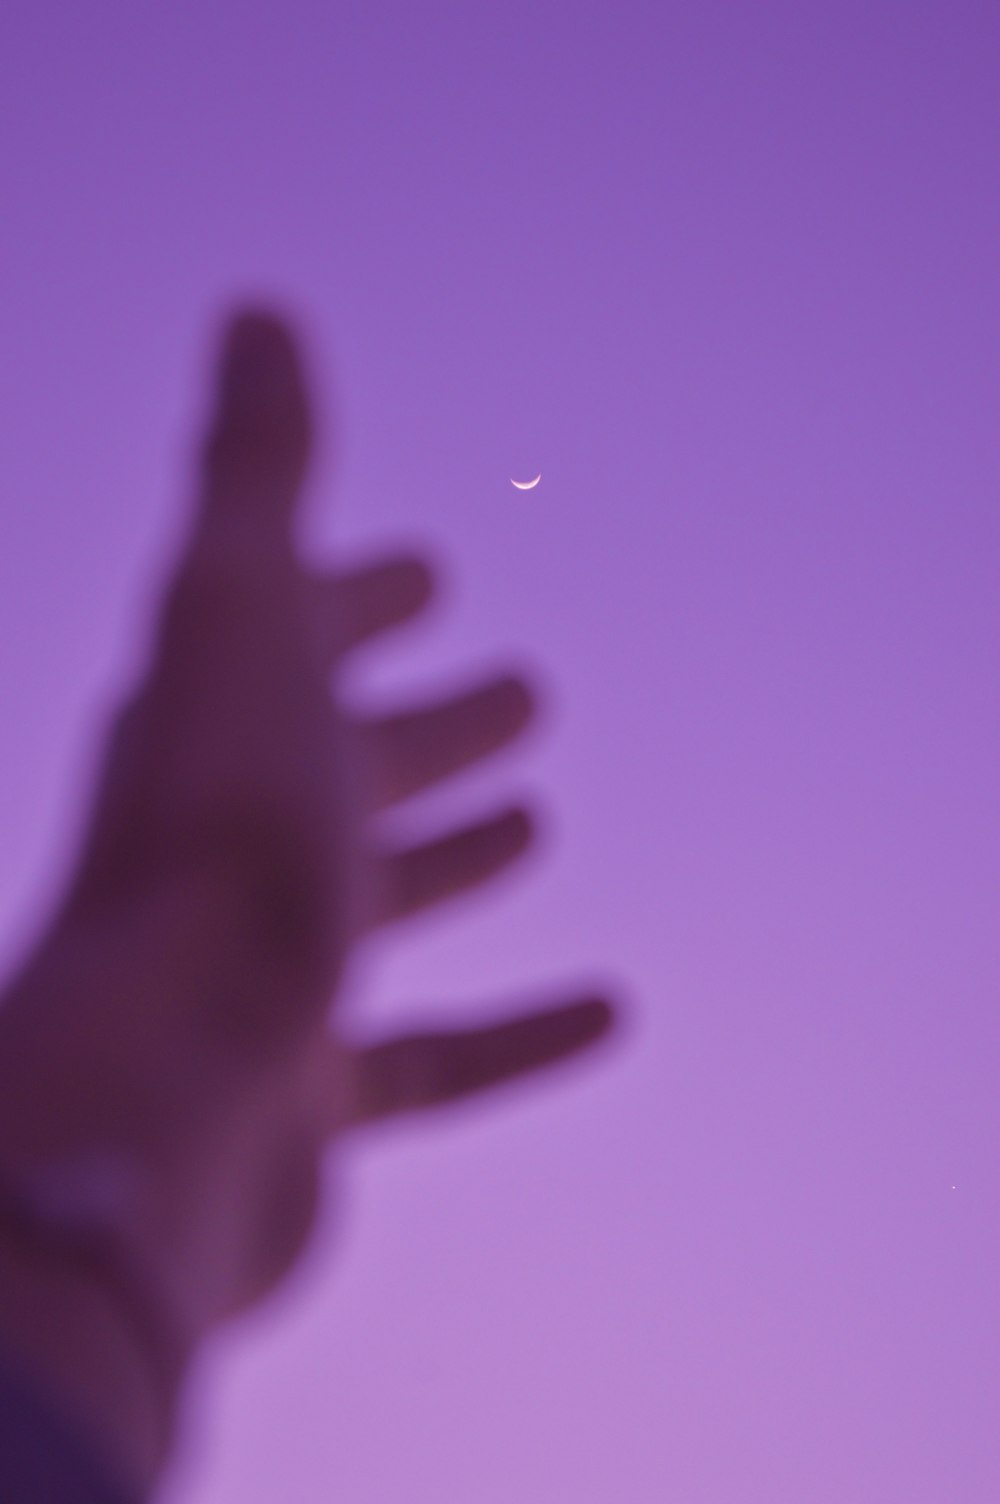 a blurry photo of a person's hand with a half moon in the